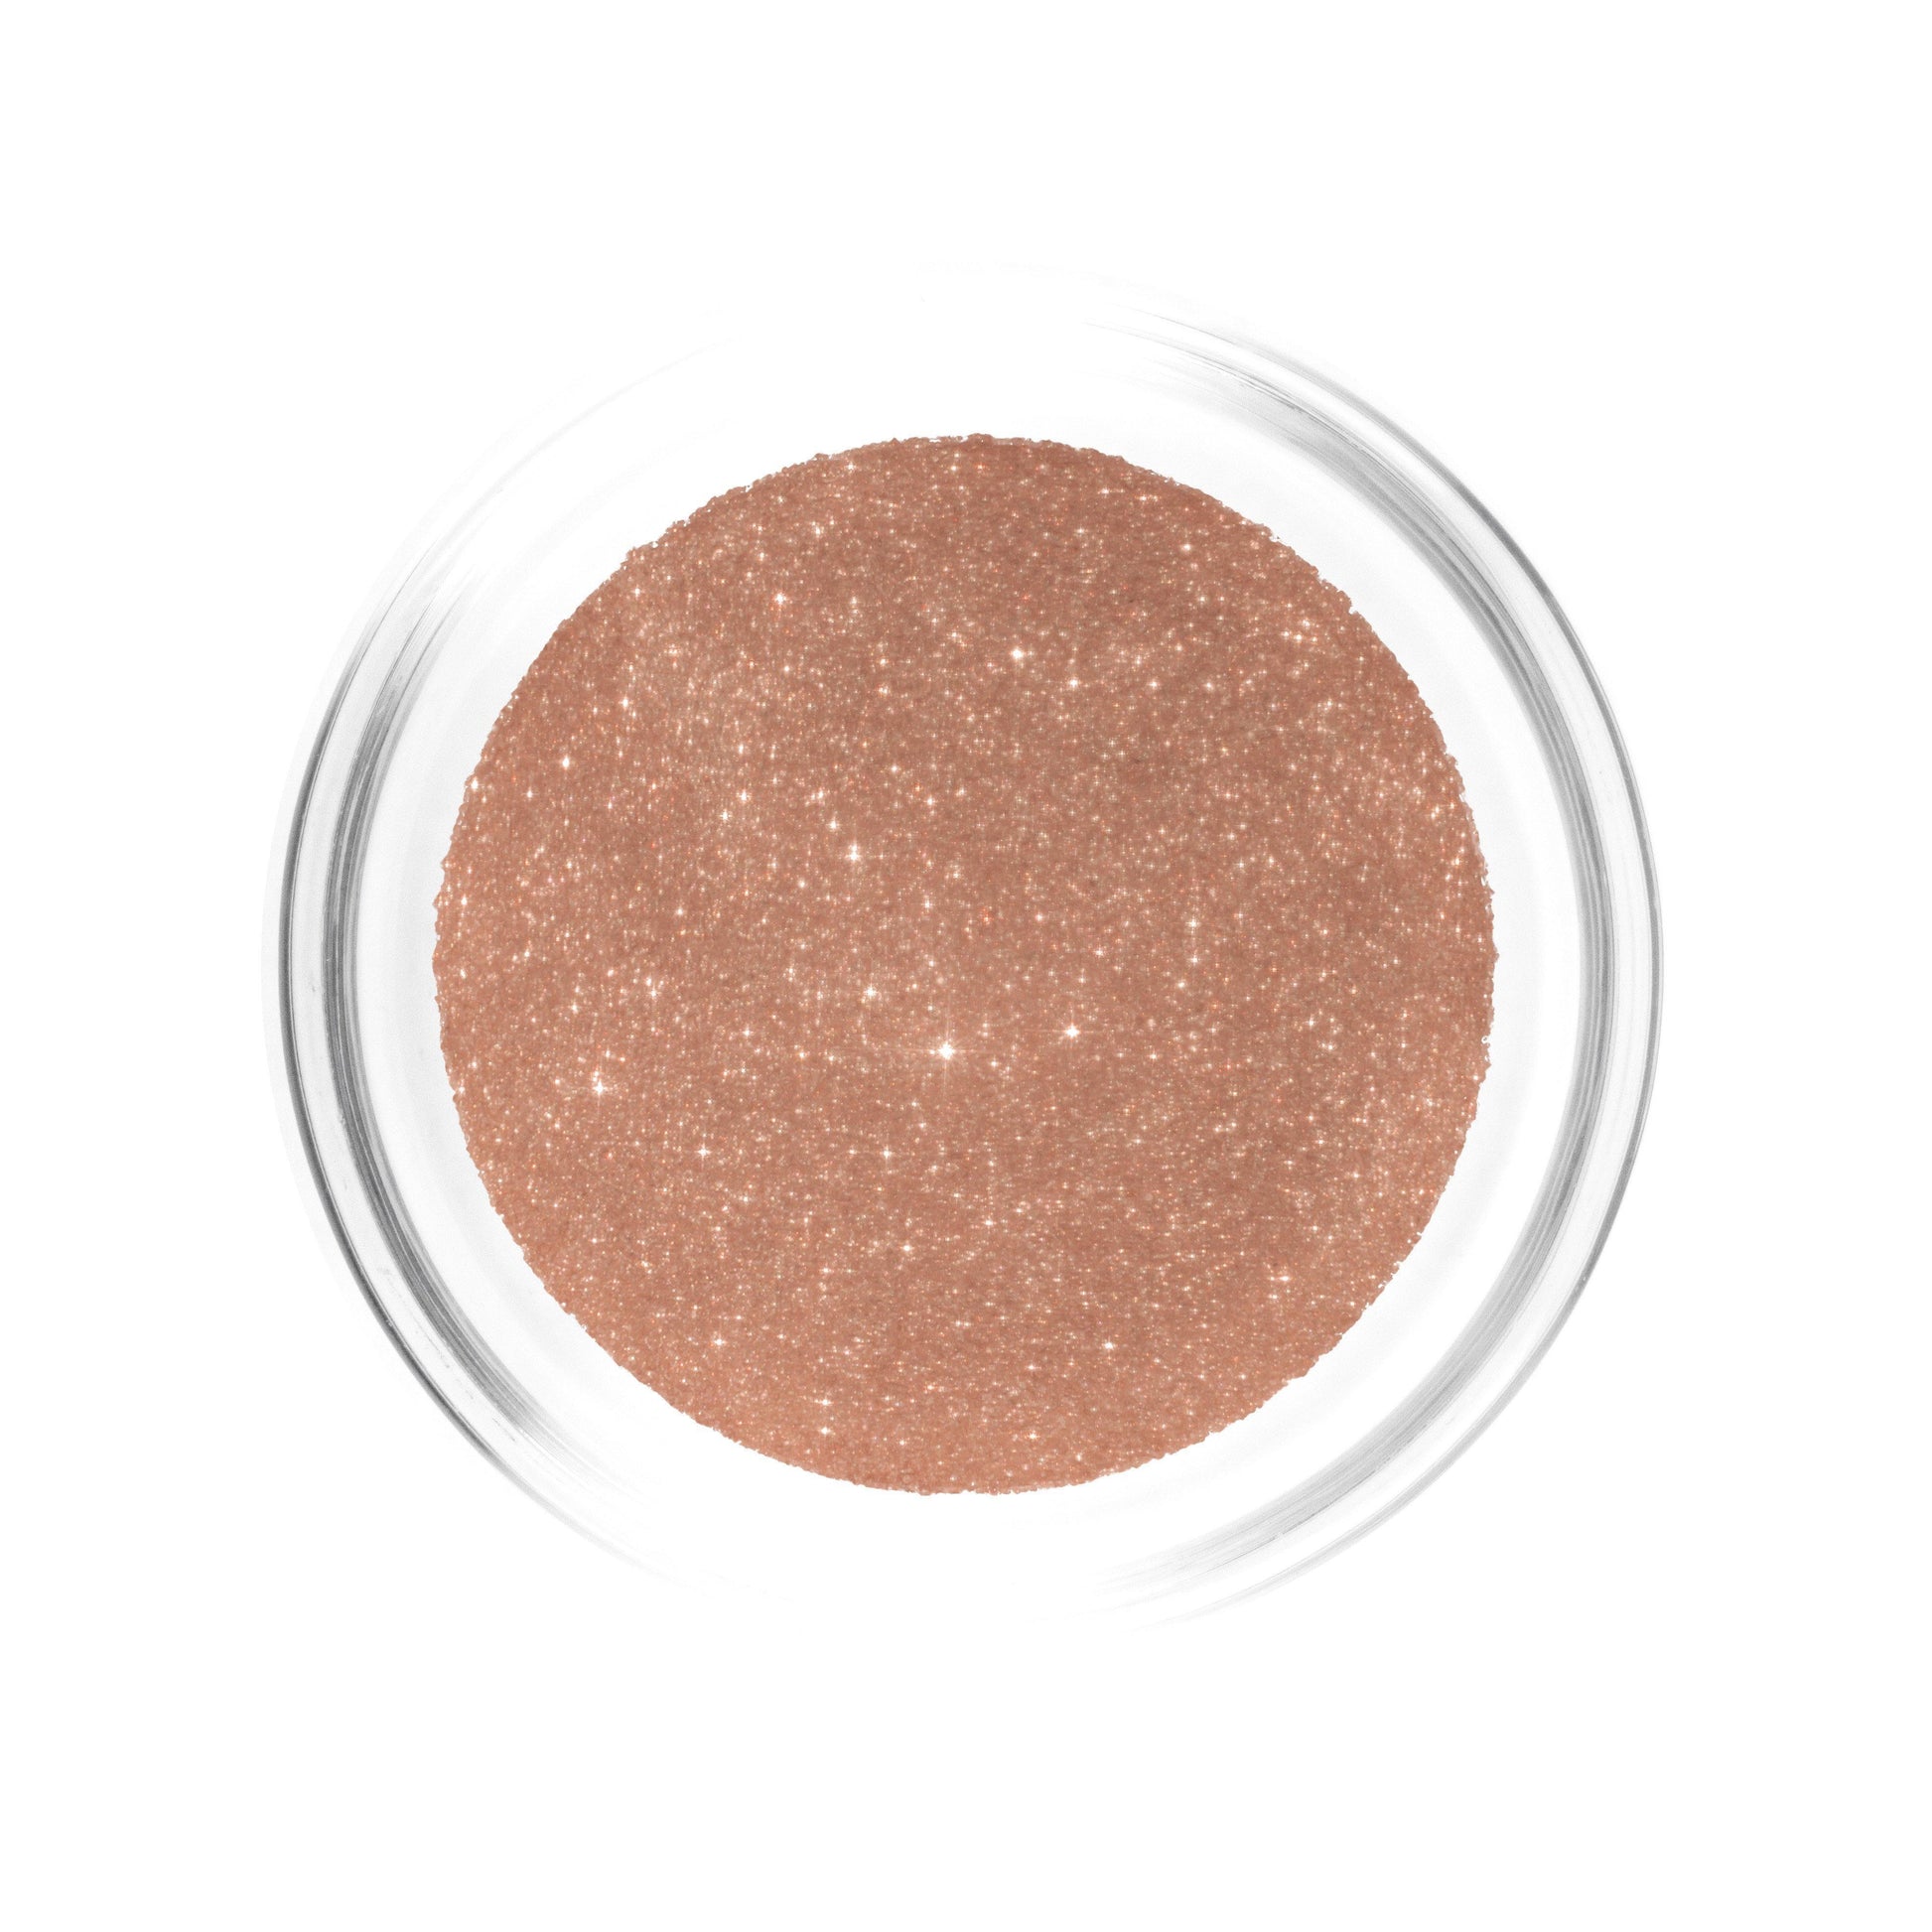 Dewy Body shimmer with pole grip - Normal to dry skin - Dancing Dust